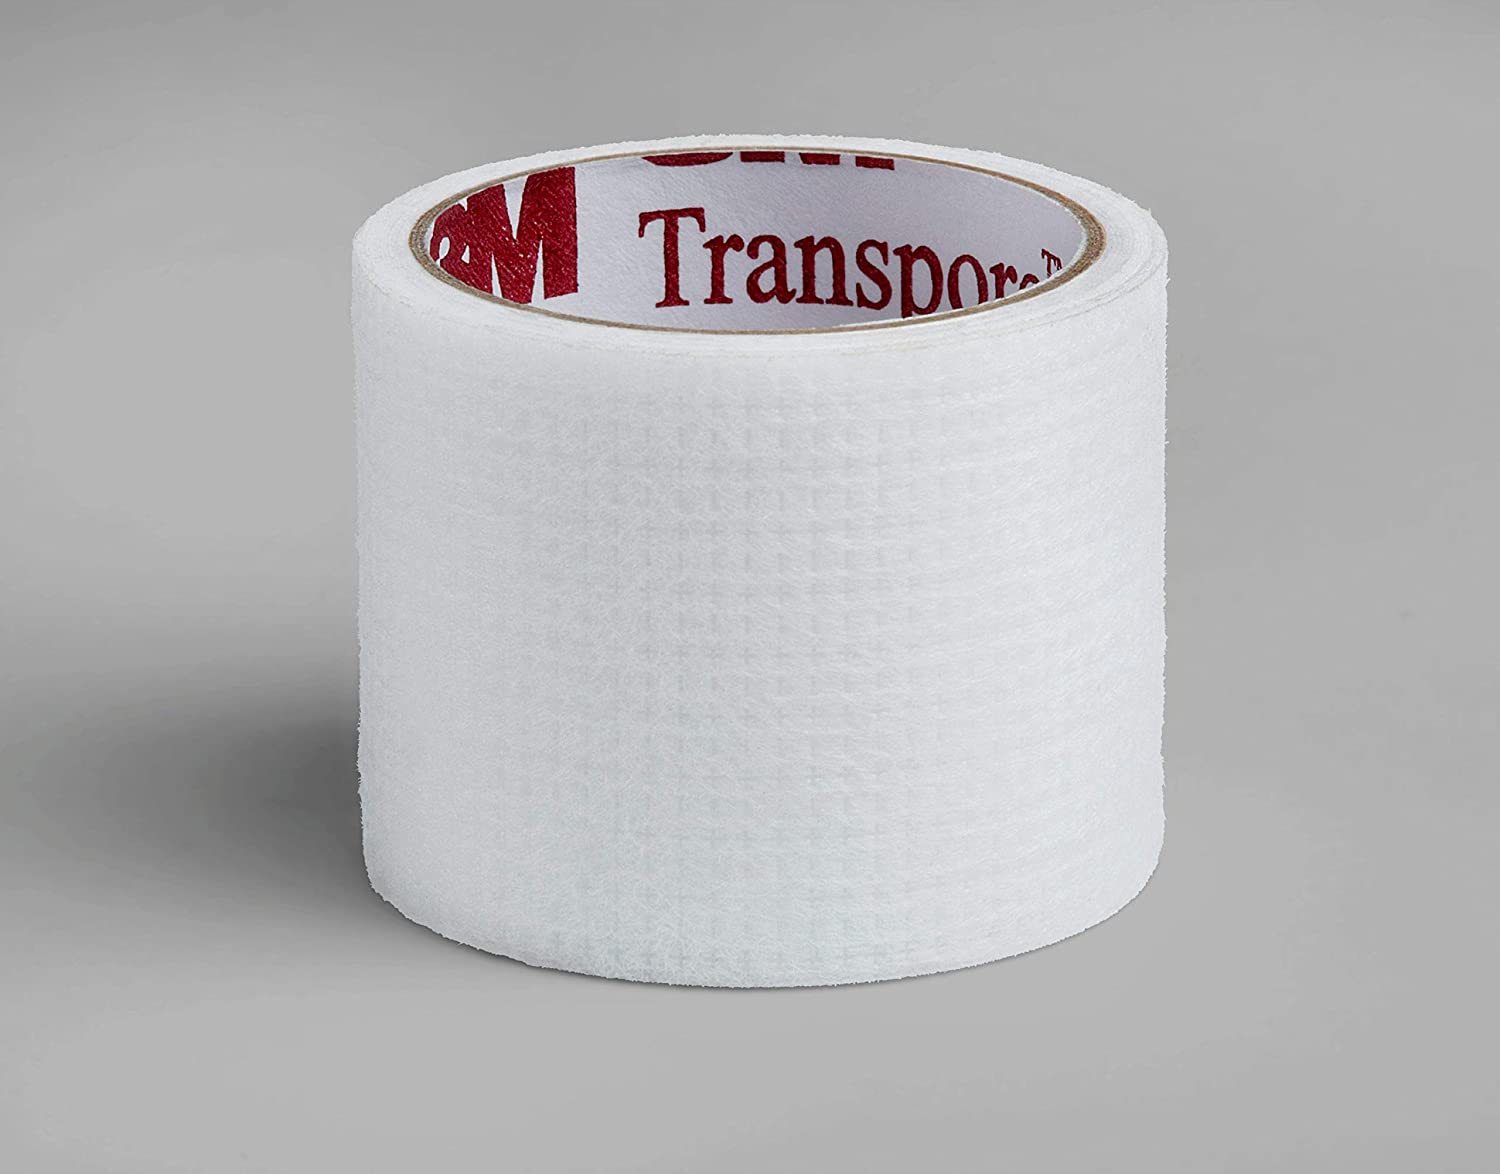 3M Micropore Medical Tape 1 Inch X 1-1/2 Yard - Box of 100 